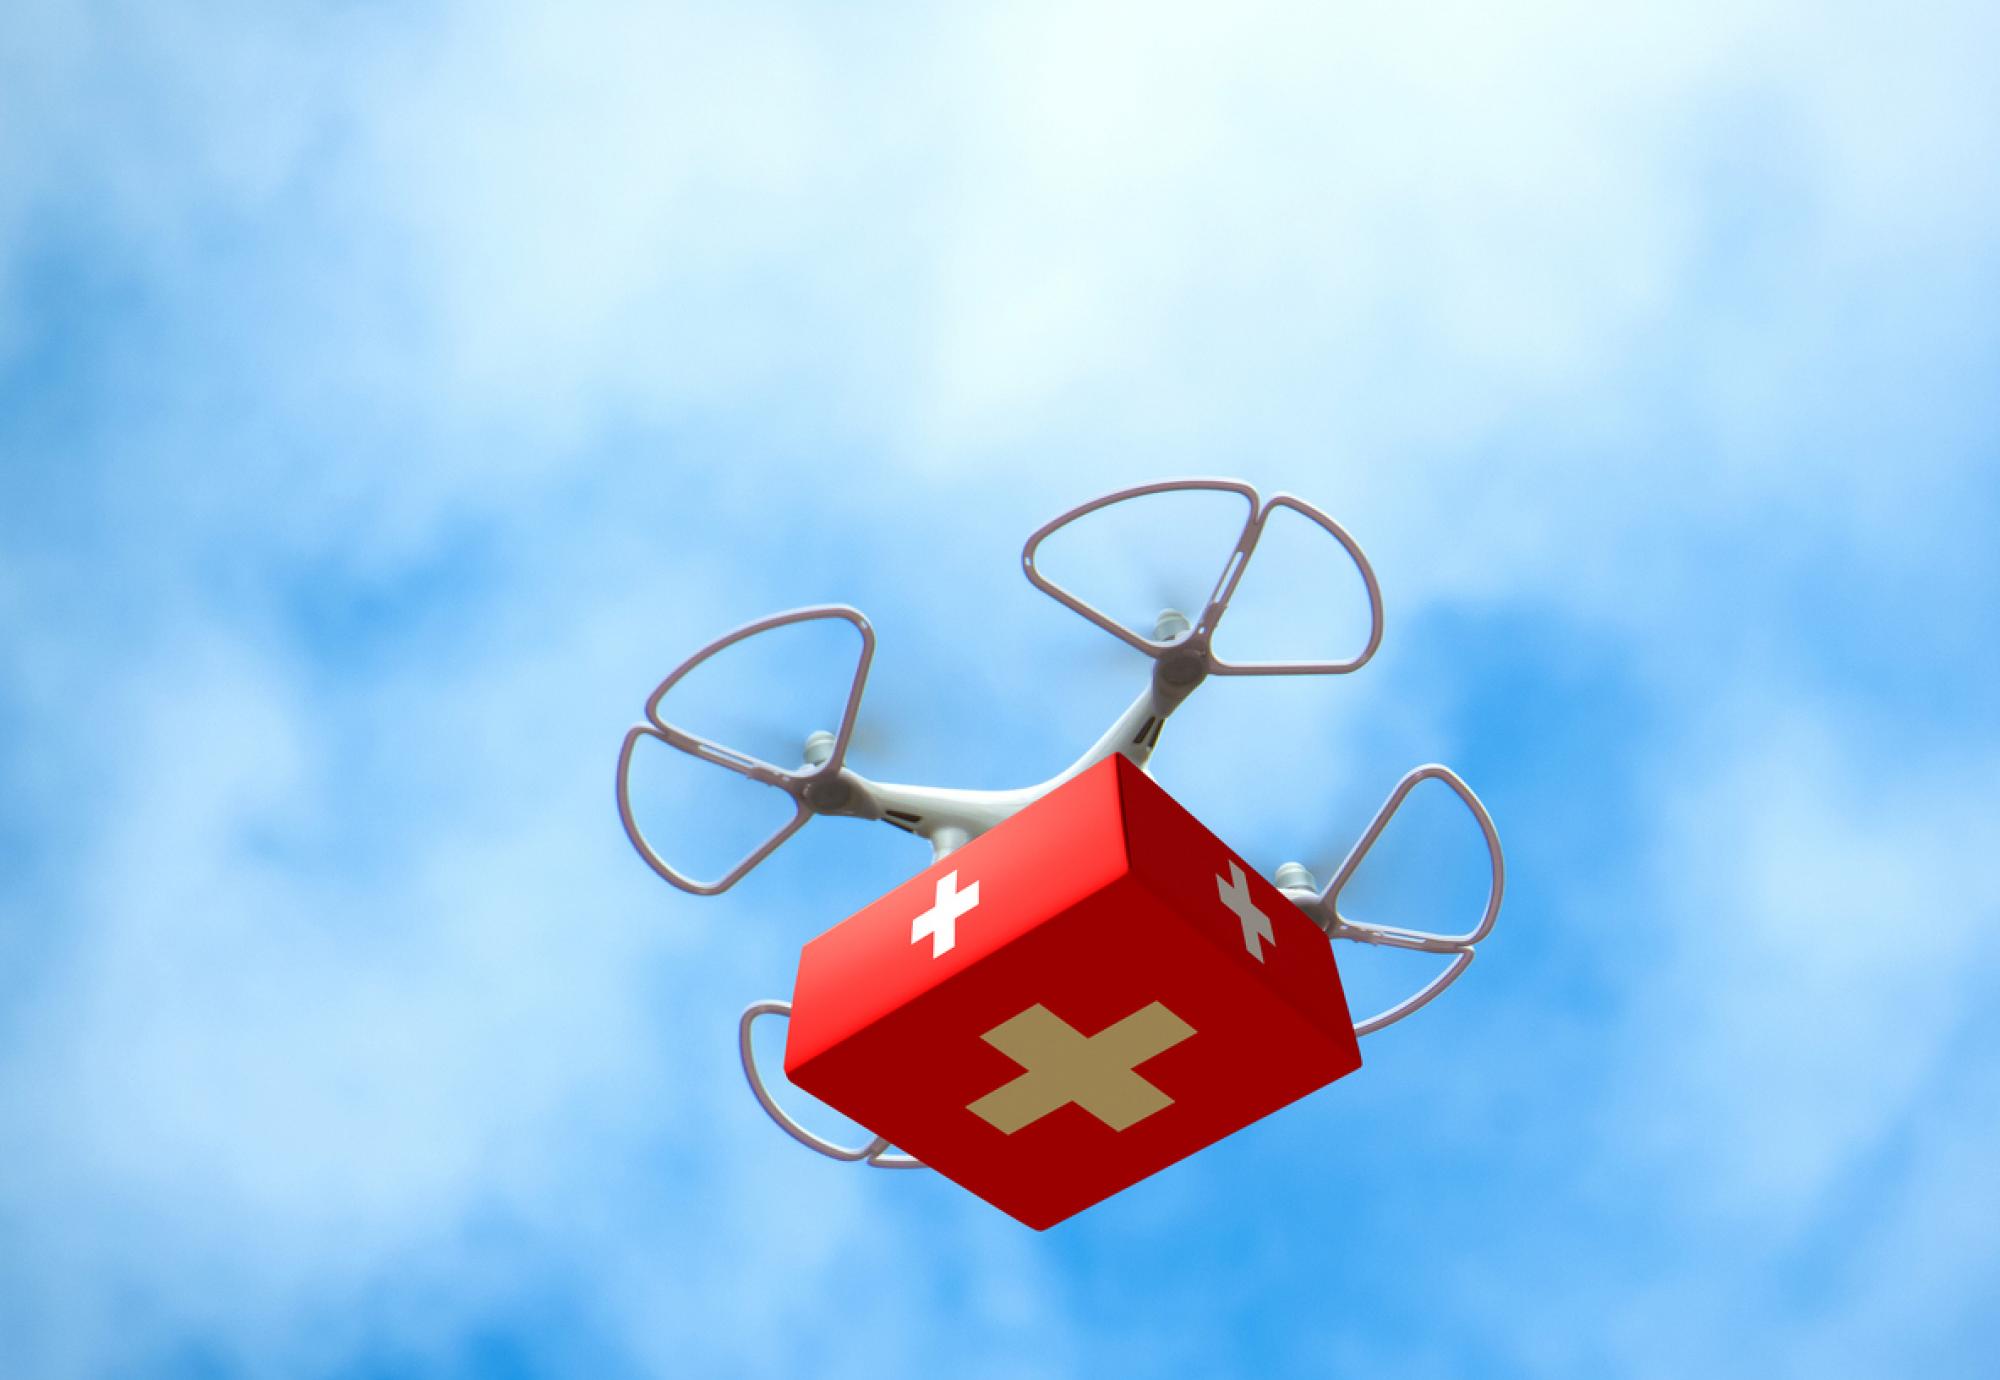 Medical drone depicting NHS Scotland's drone network